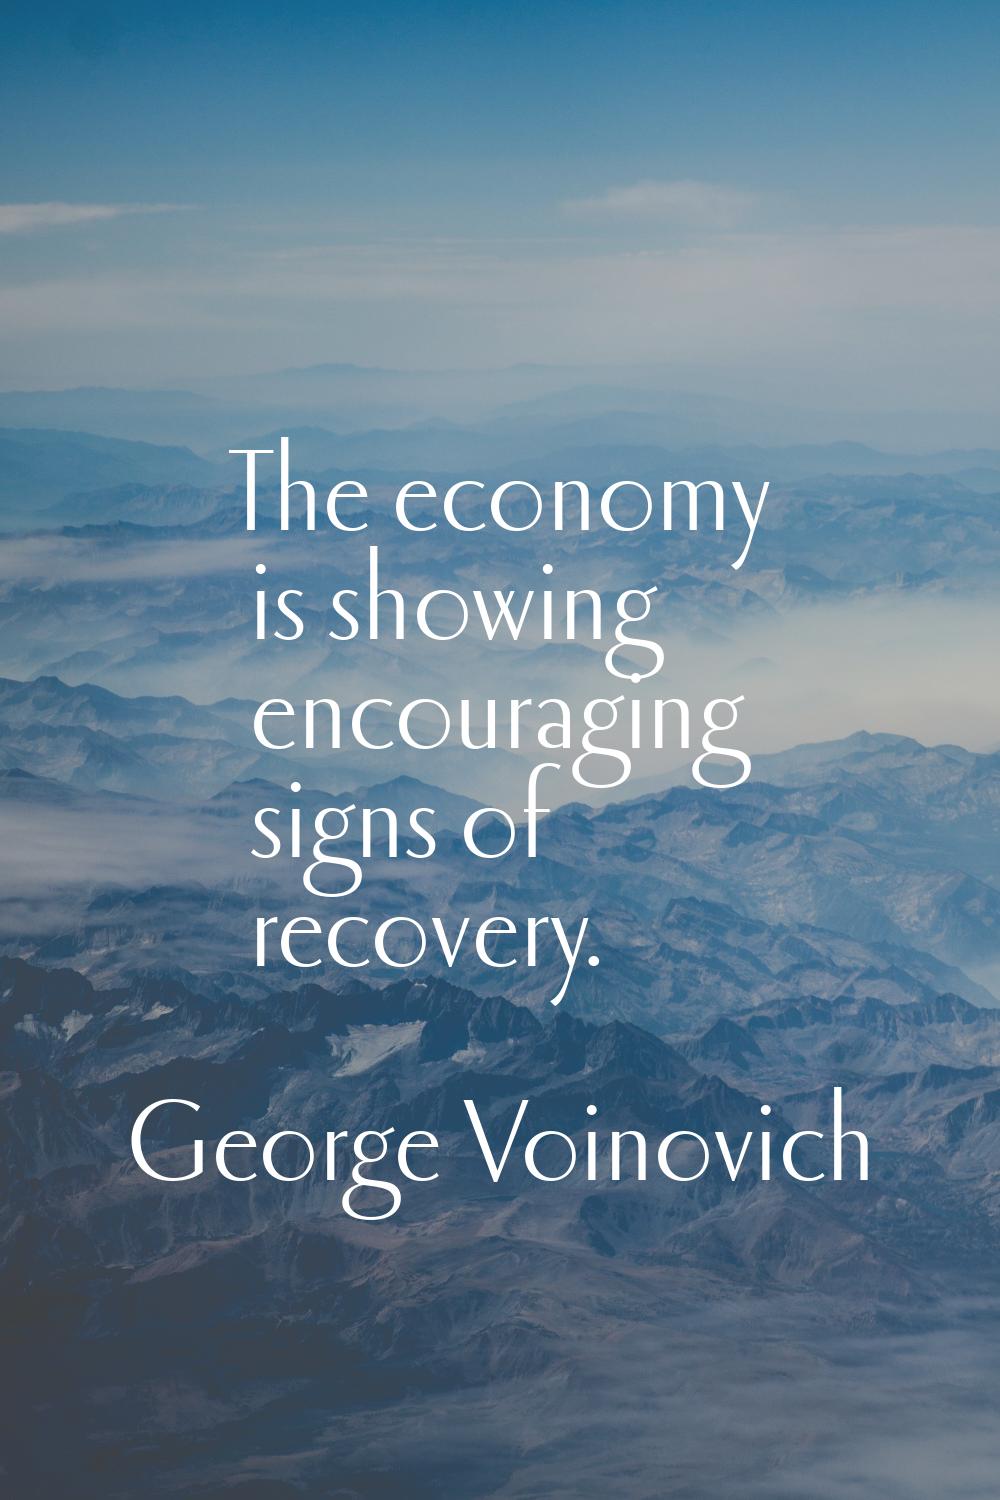 The economy is showing encouraging signs of recovery.